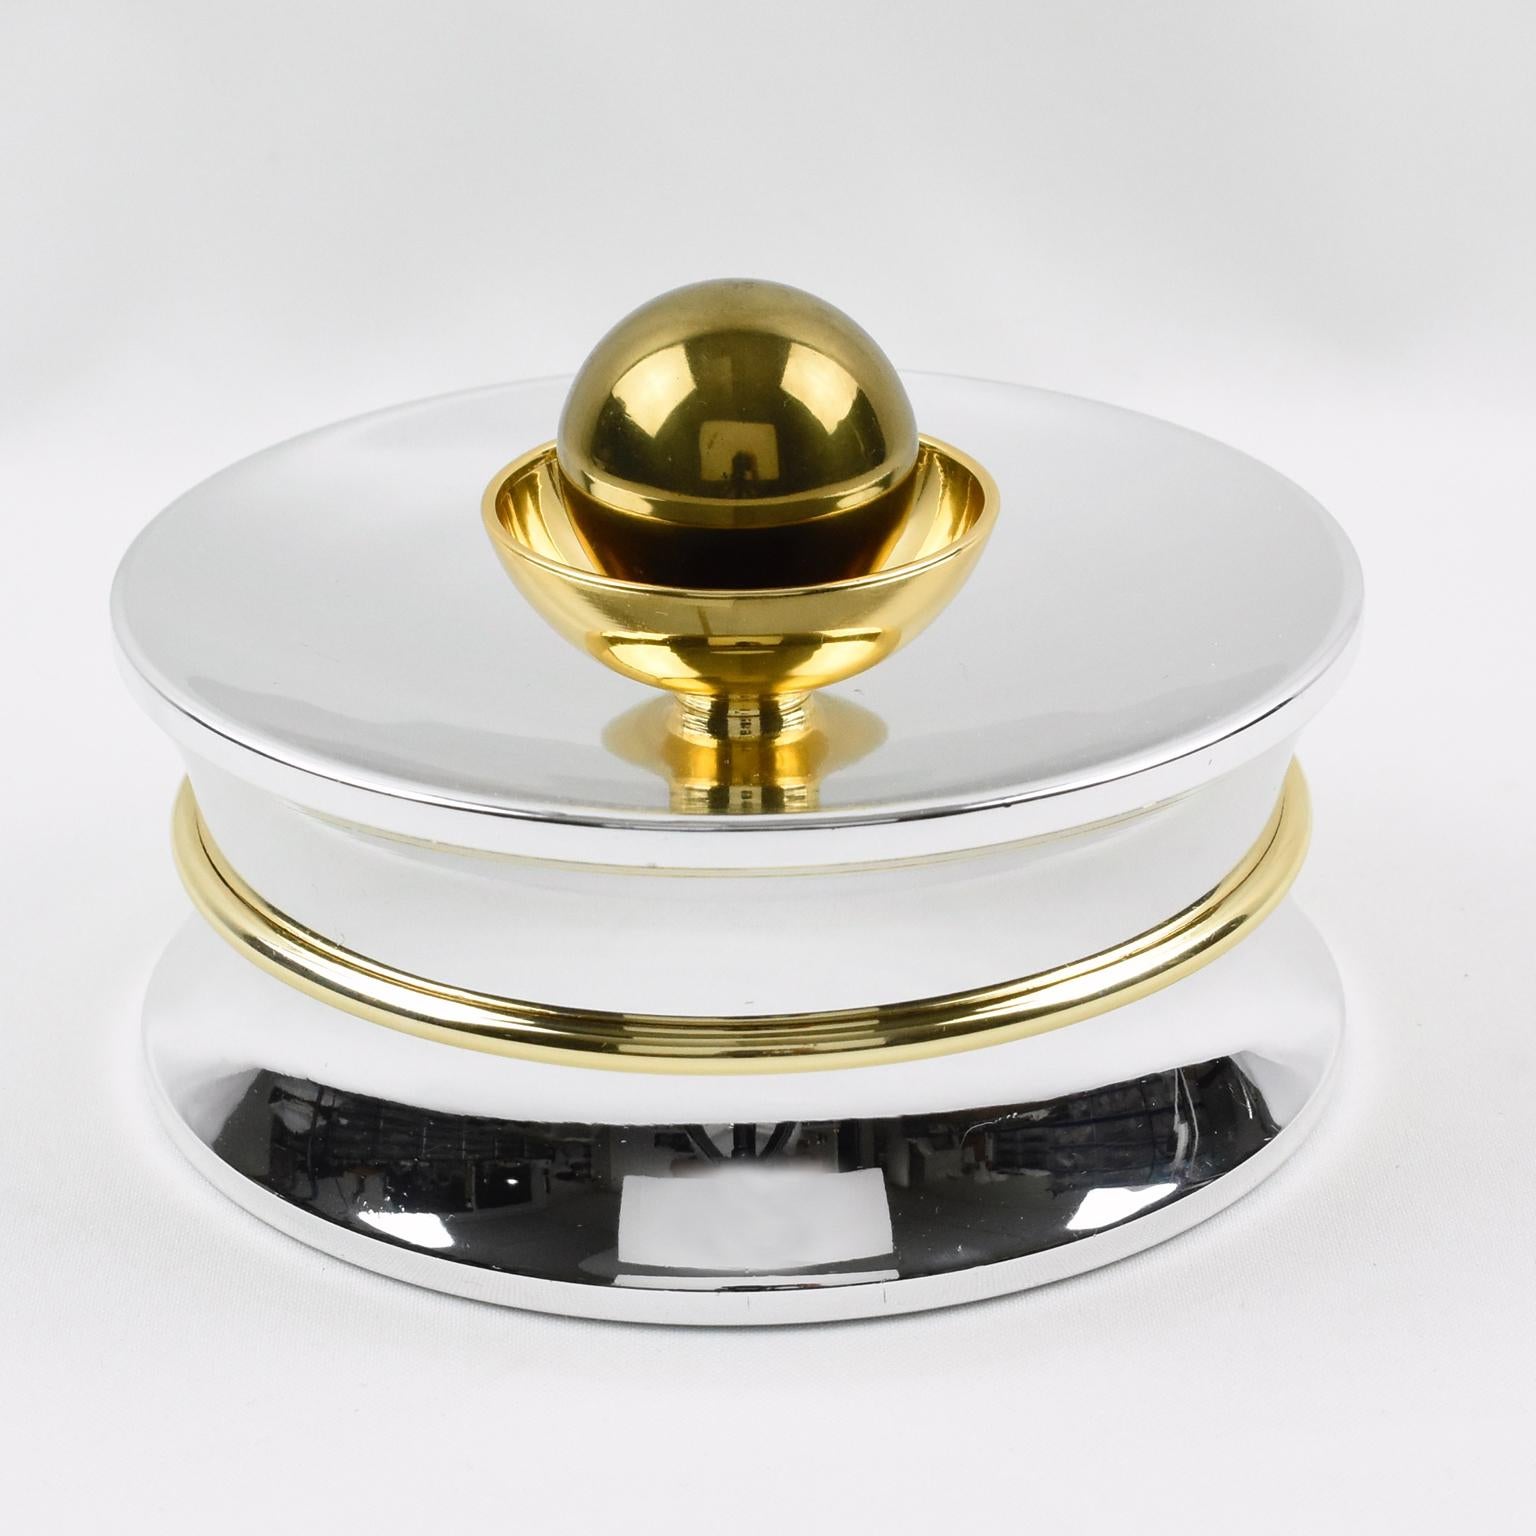 Rare elegant 1970s chrome and brass candy gift box for A La Marquise De Sevigne, the finest Paris chocolate store. Round Art-Deco-inspired modernist shape with shiny chromed metal and brass accent and large ball finial. Marked underside with the